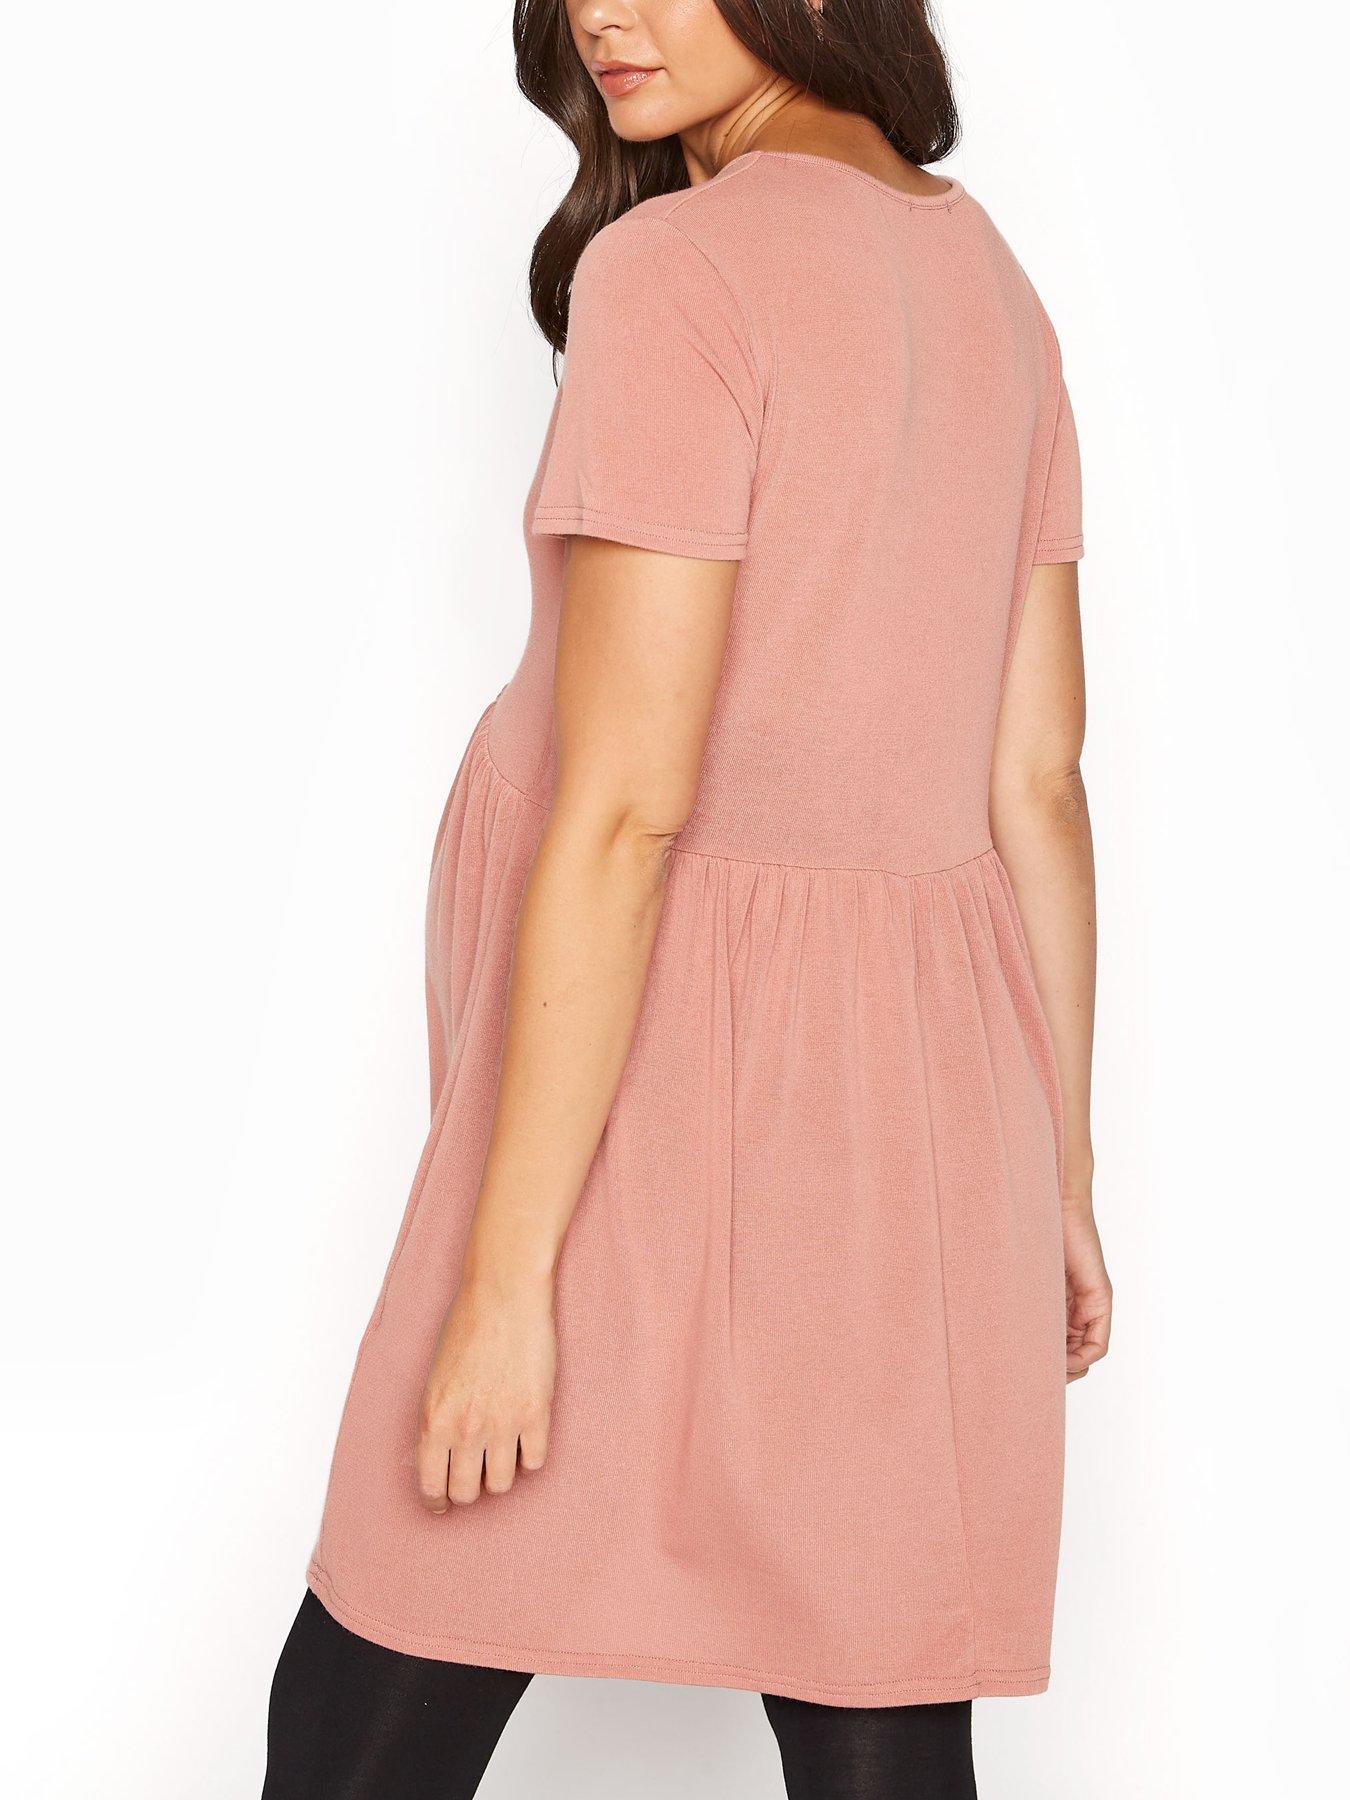  Long Tall Sally Maternity Fine Knit Smock Top